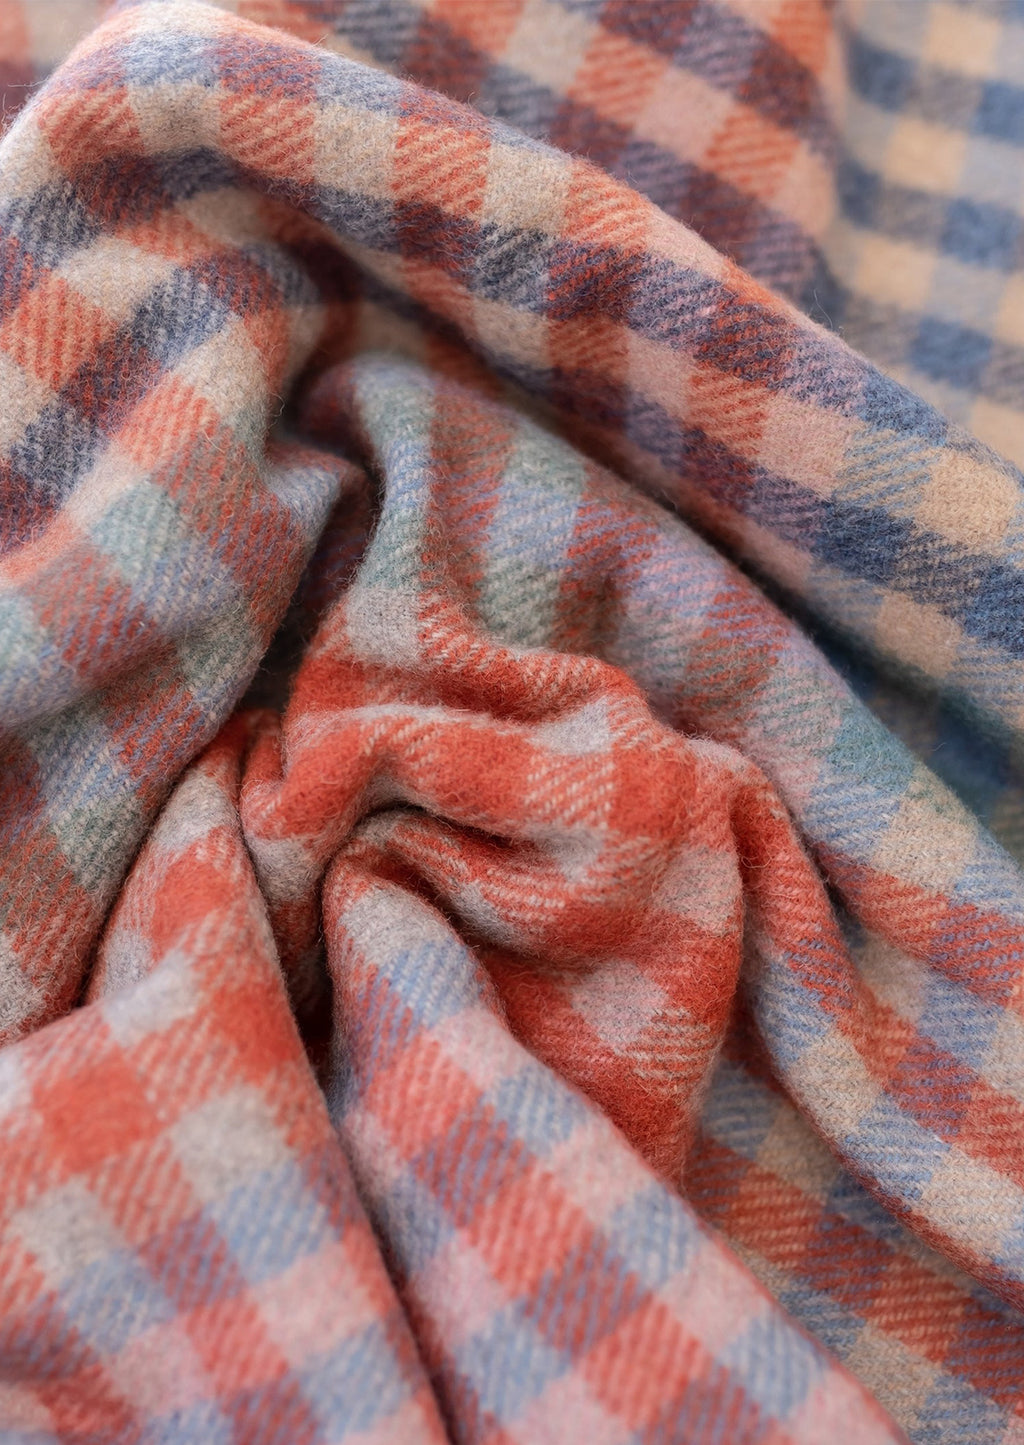 3: A gingham check patterned wool blanket in shades of red and cornflower blue.